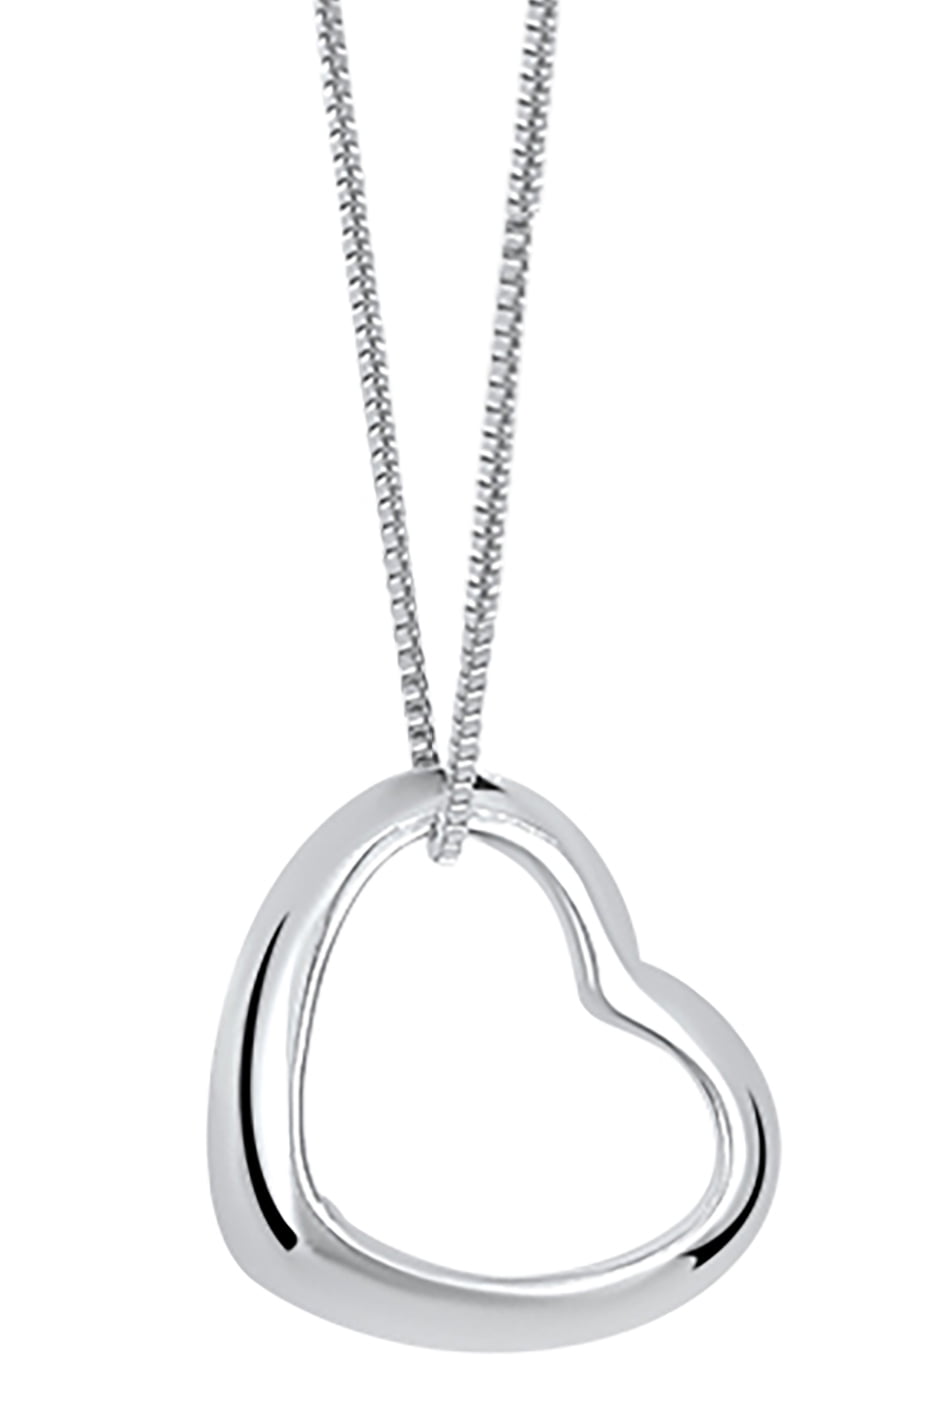 Sterling Silver Heart in Heart Fountain Pendant Necklace Chain Gift Box 